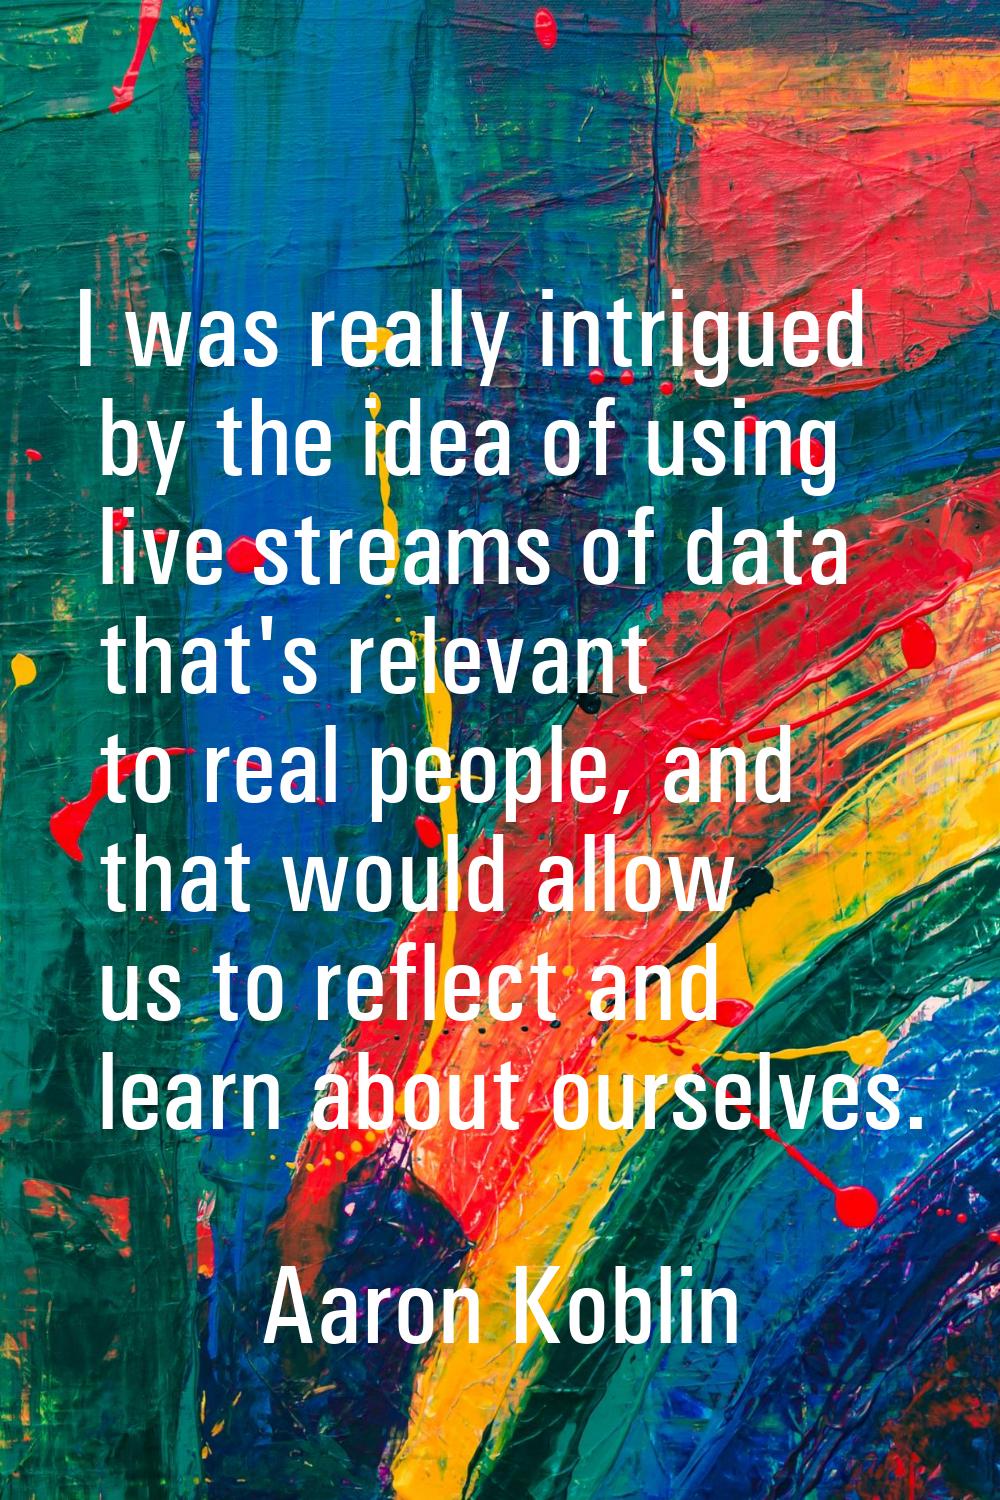 I was really intrigued by the idea of using live streams of data that's relevant to real people, an